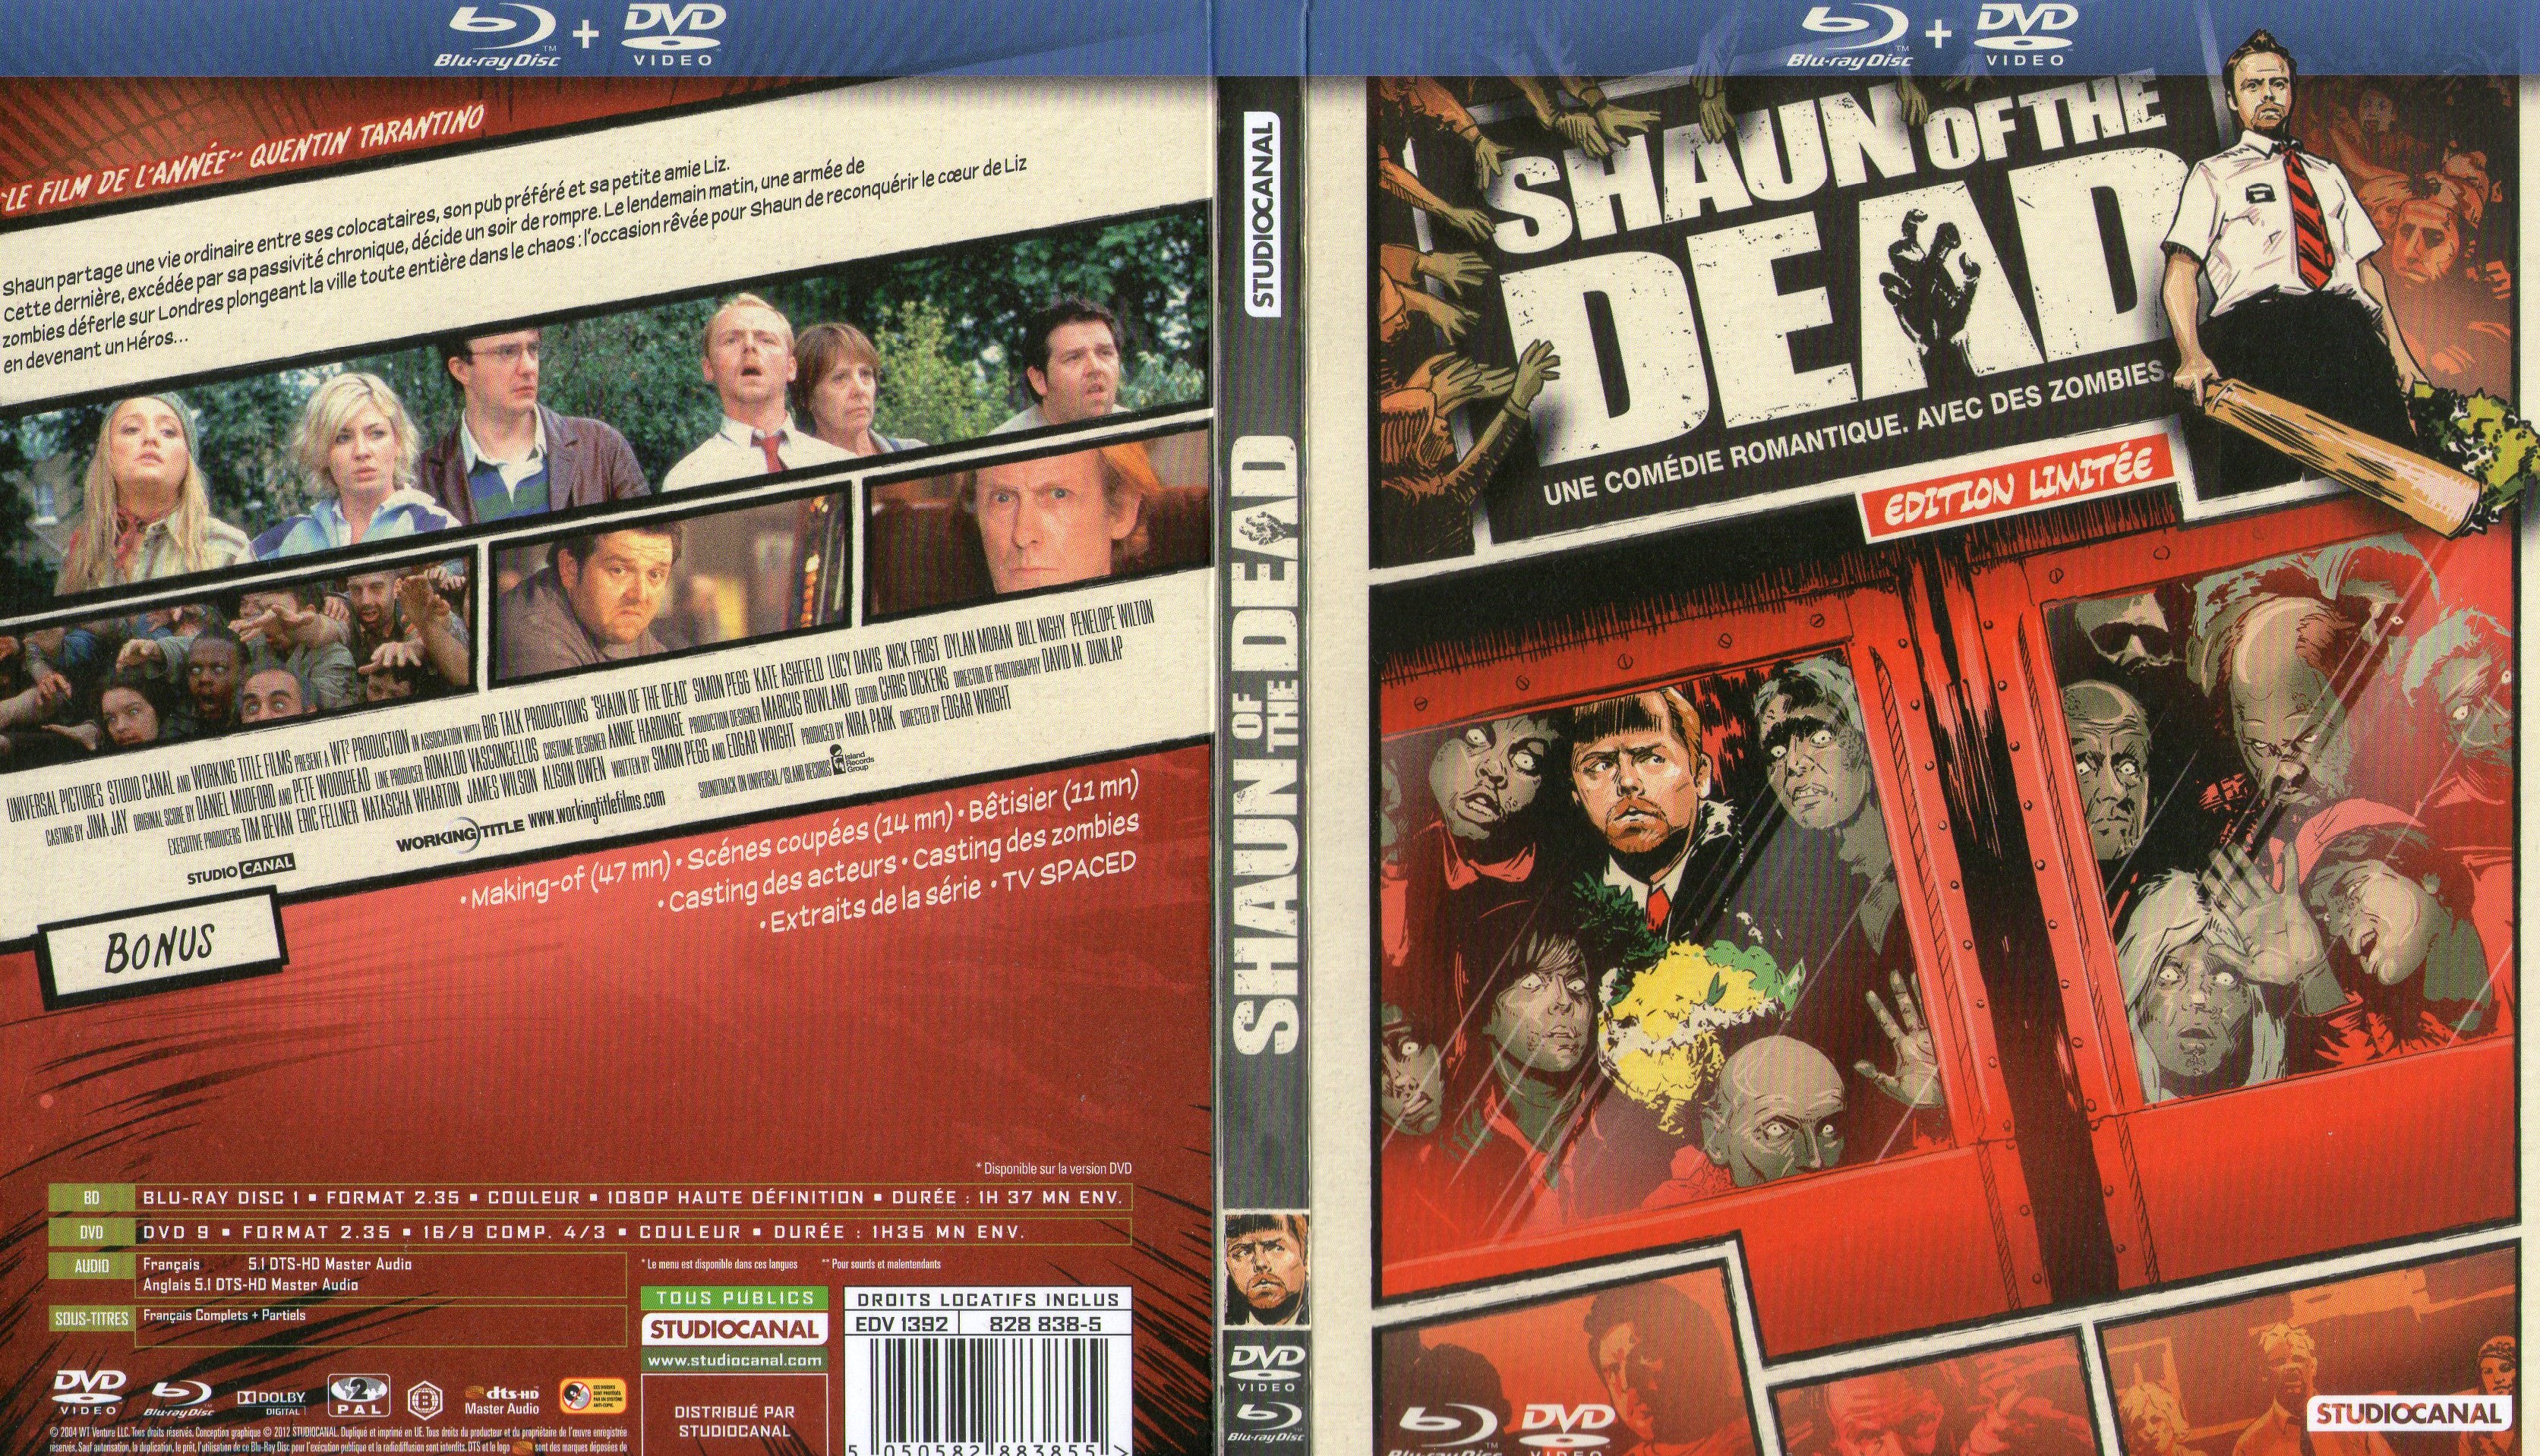 Jaquette DVD Shaun of the Dead (BLU-RAY)